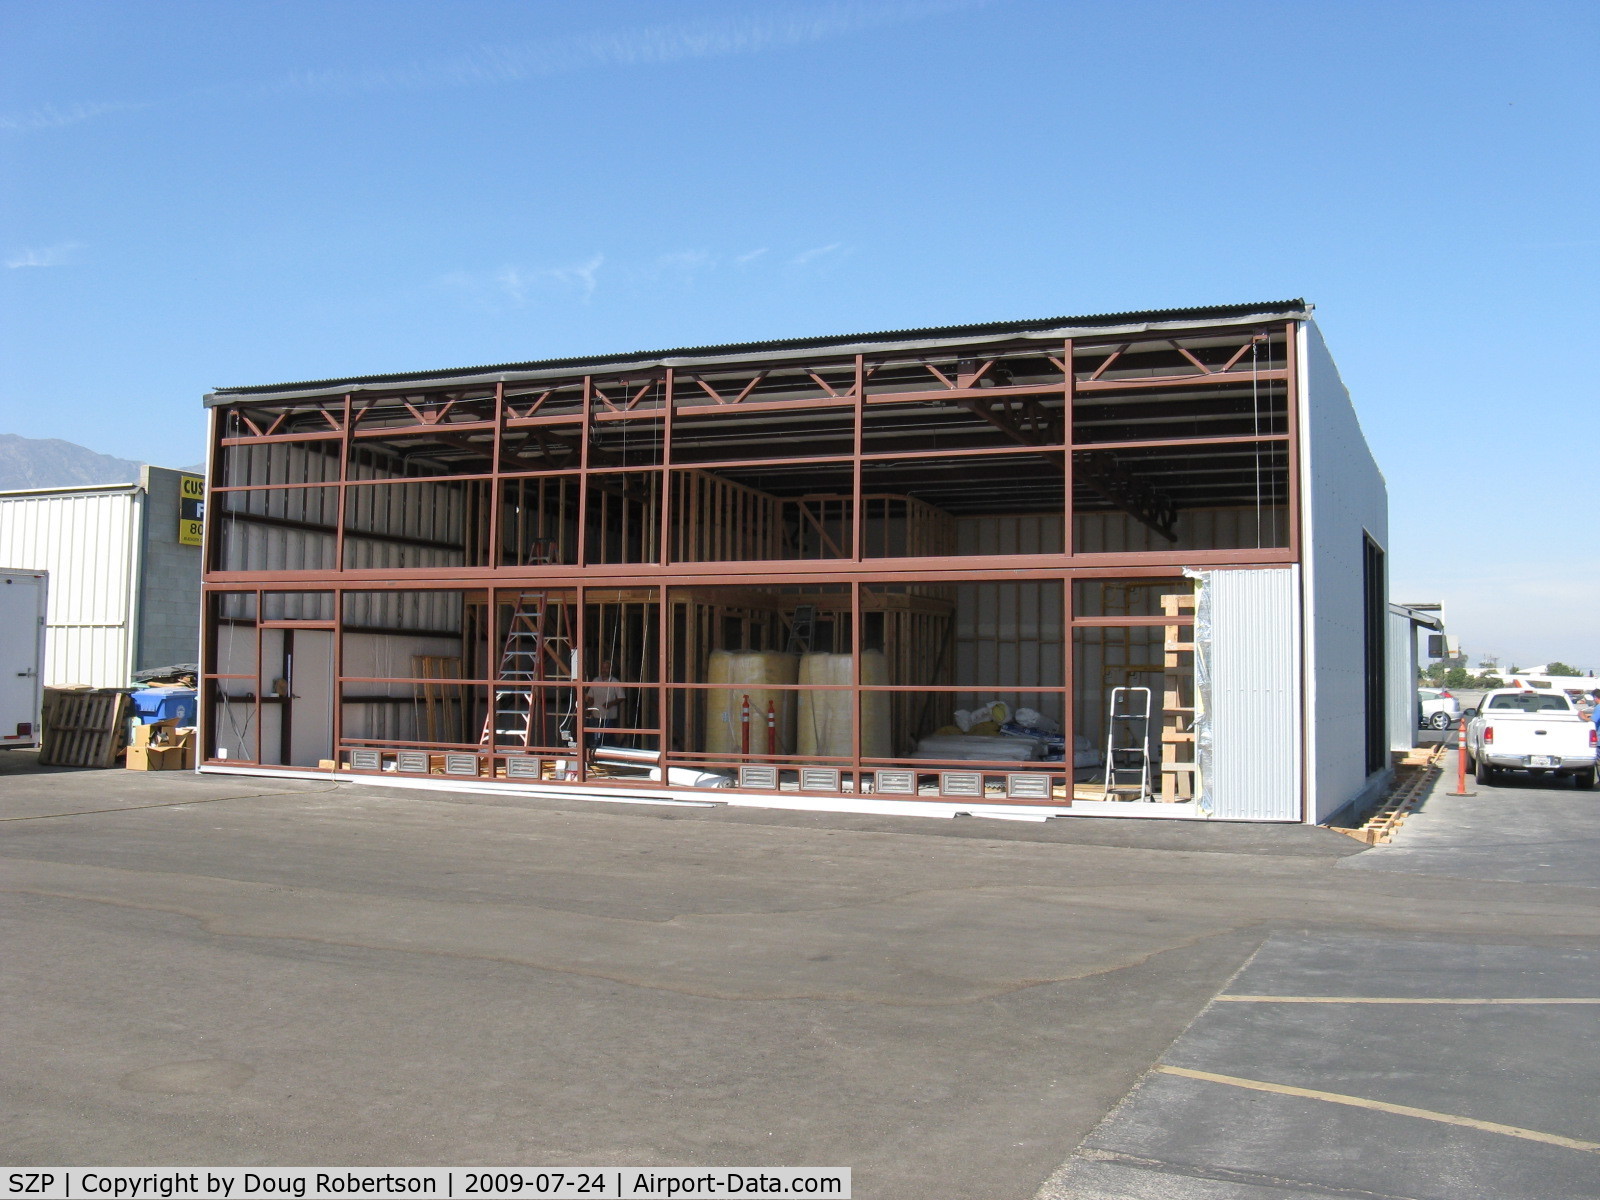 Santa Paula Airport (SZP) - New hangar under construction. Insulated, internal wall studs, framing for two-story rooms in corner